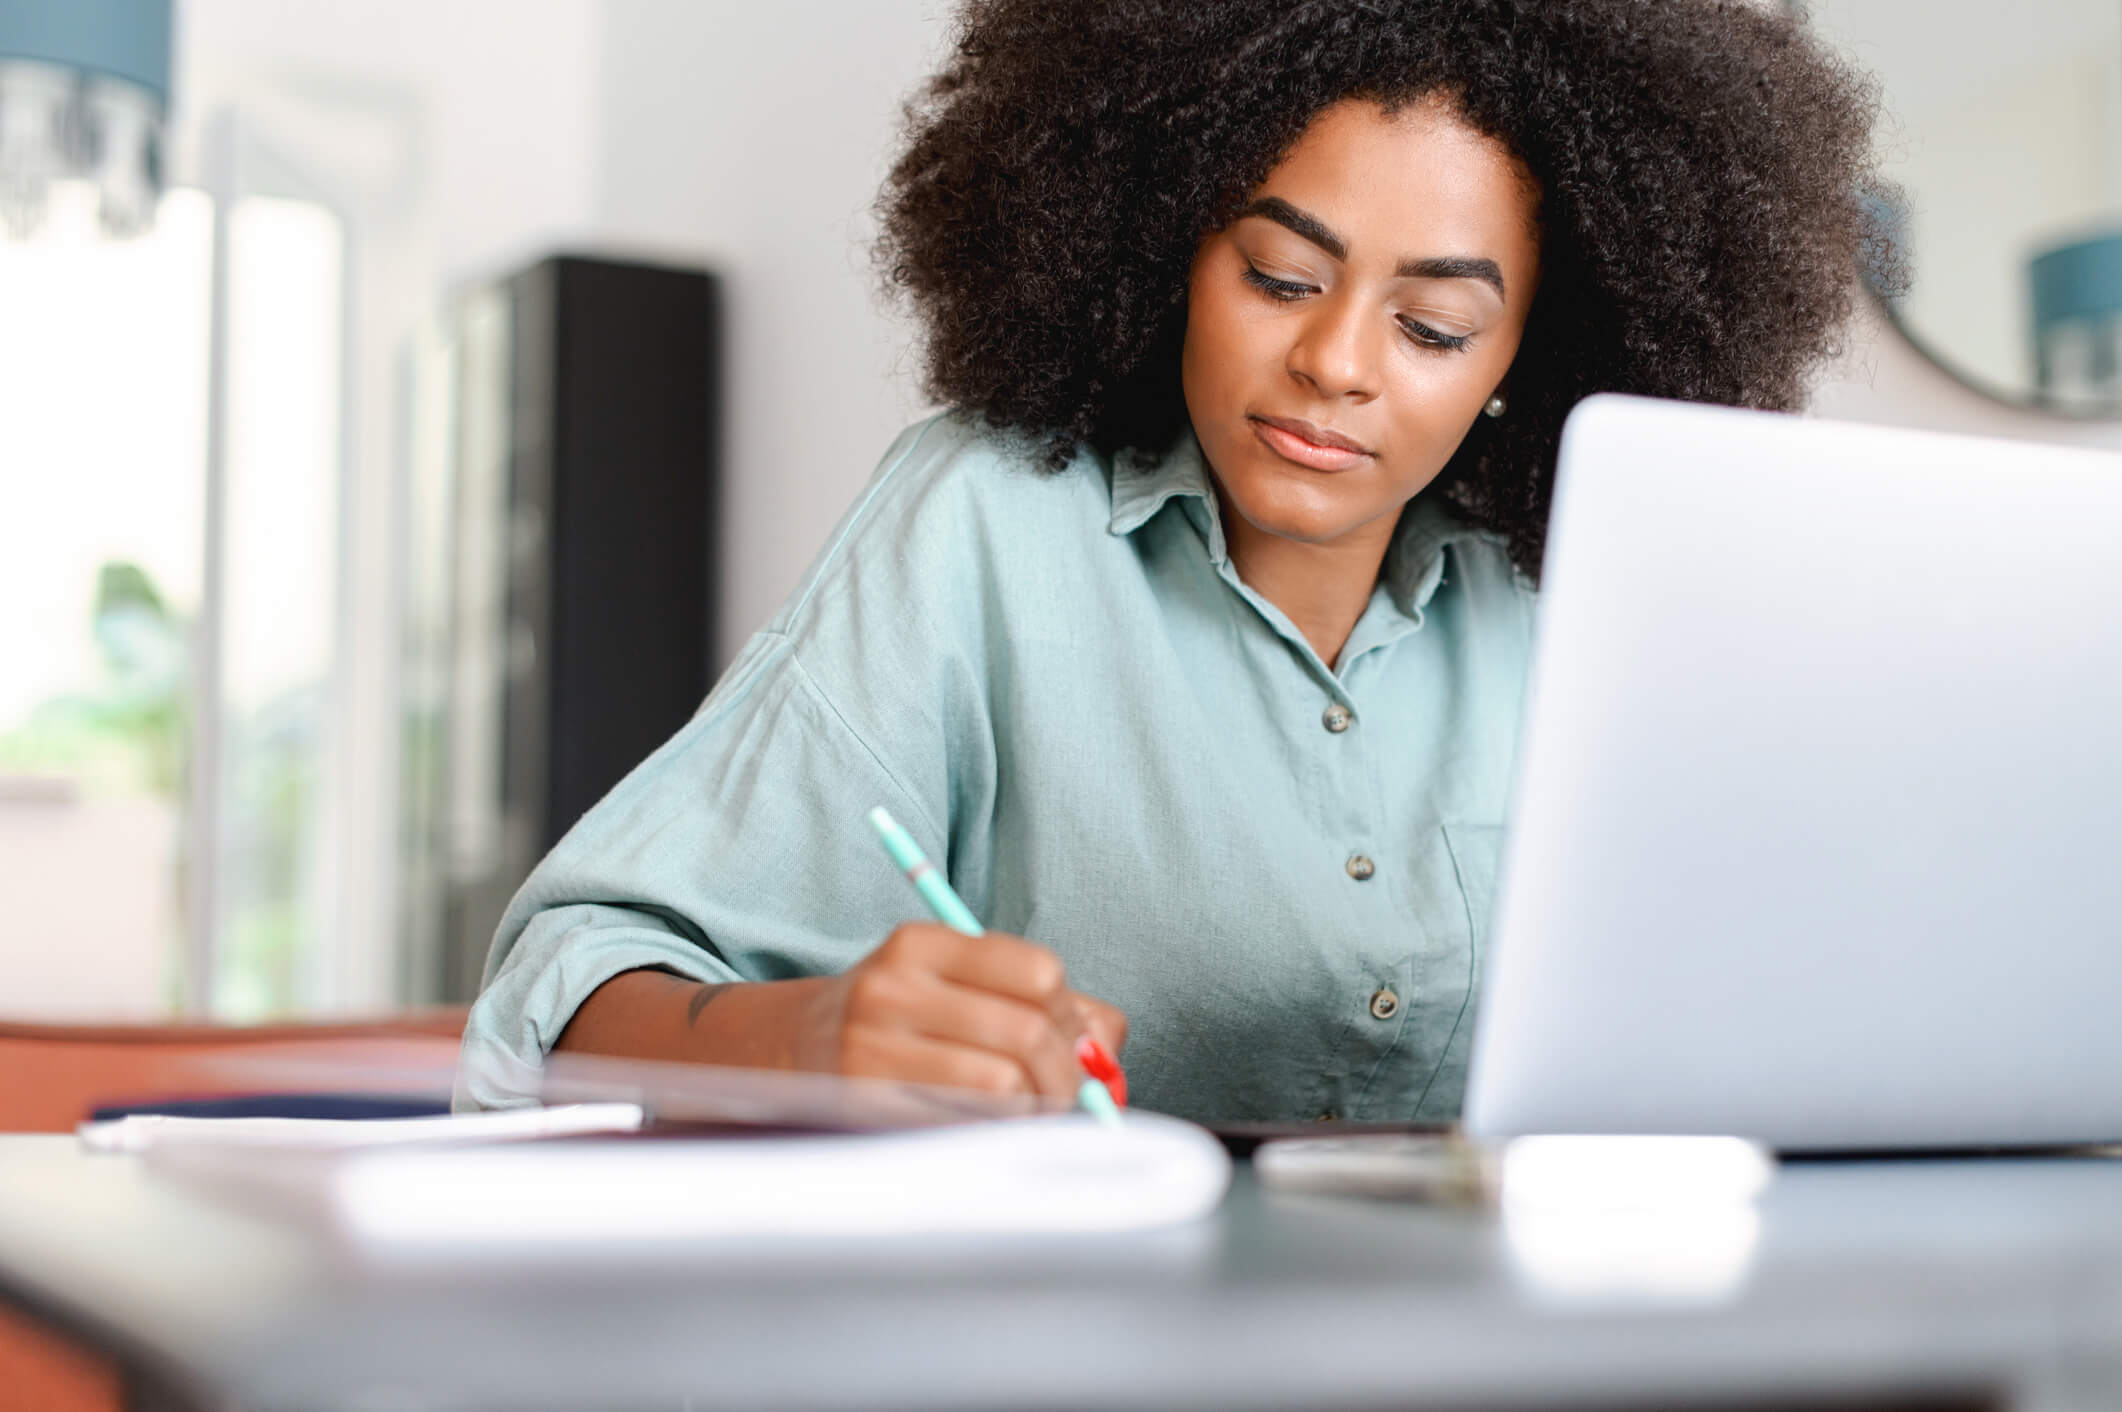 A woman is sitting at a desk in front of a laptop and is taking notes on paper; she has a content expression.